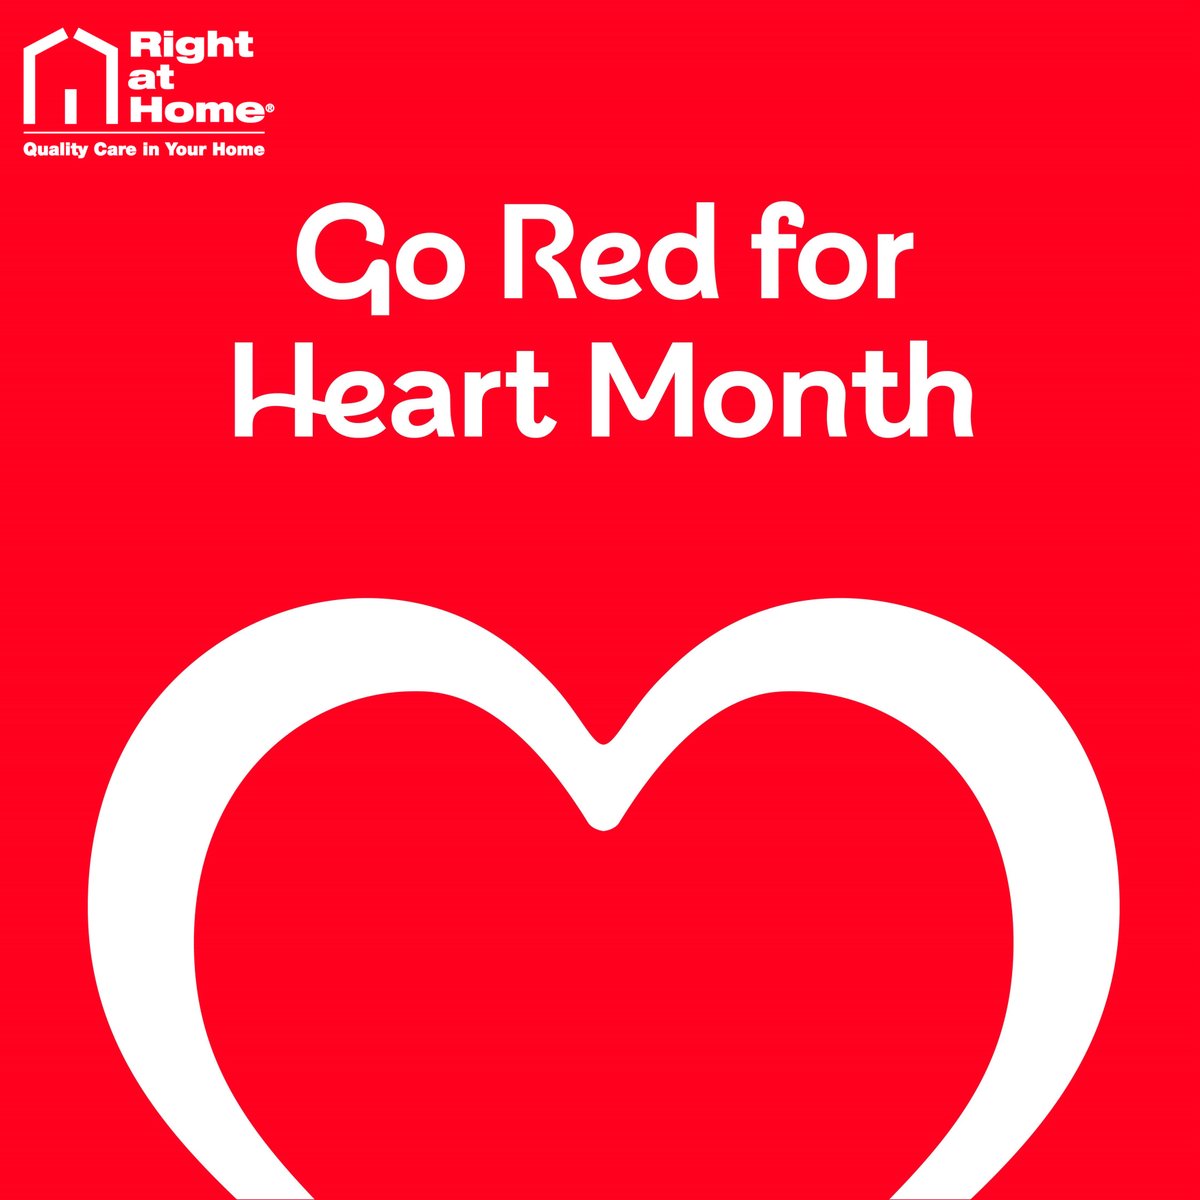 Deck yourself out in red to champion heart health with the @thebhf ❤️ Read about our united fight against cardiovascular diseases on our website: rightathome.co.uk/about-us/chari… 🩺💪 #HeartMonth